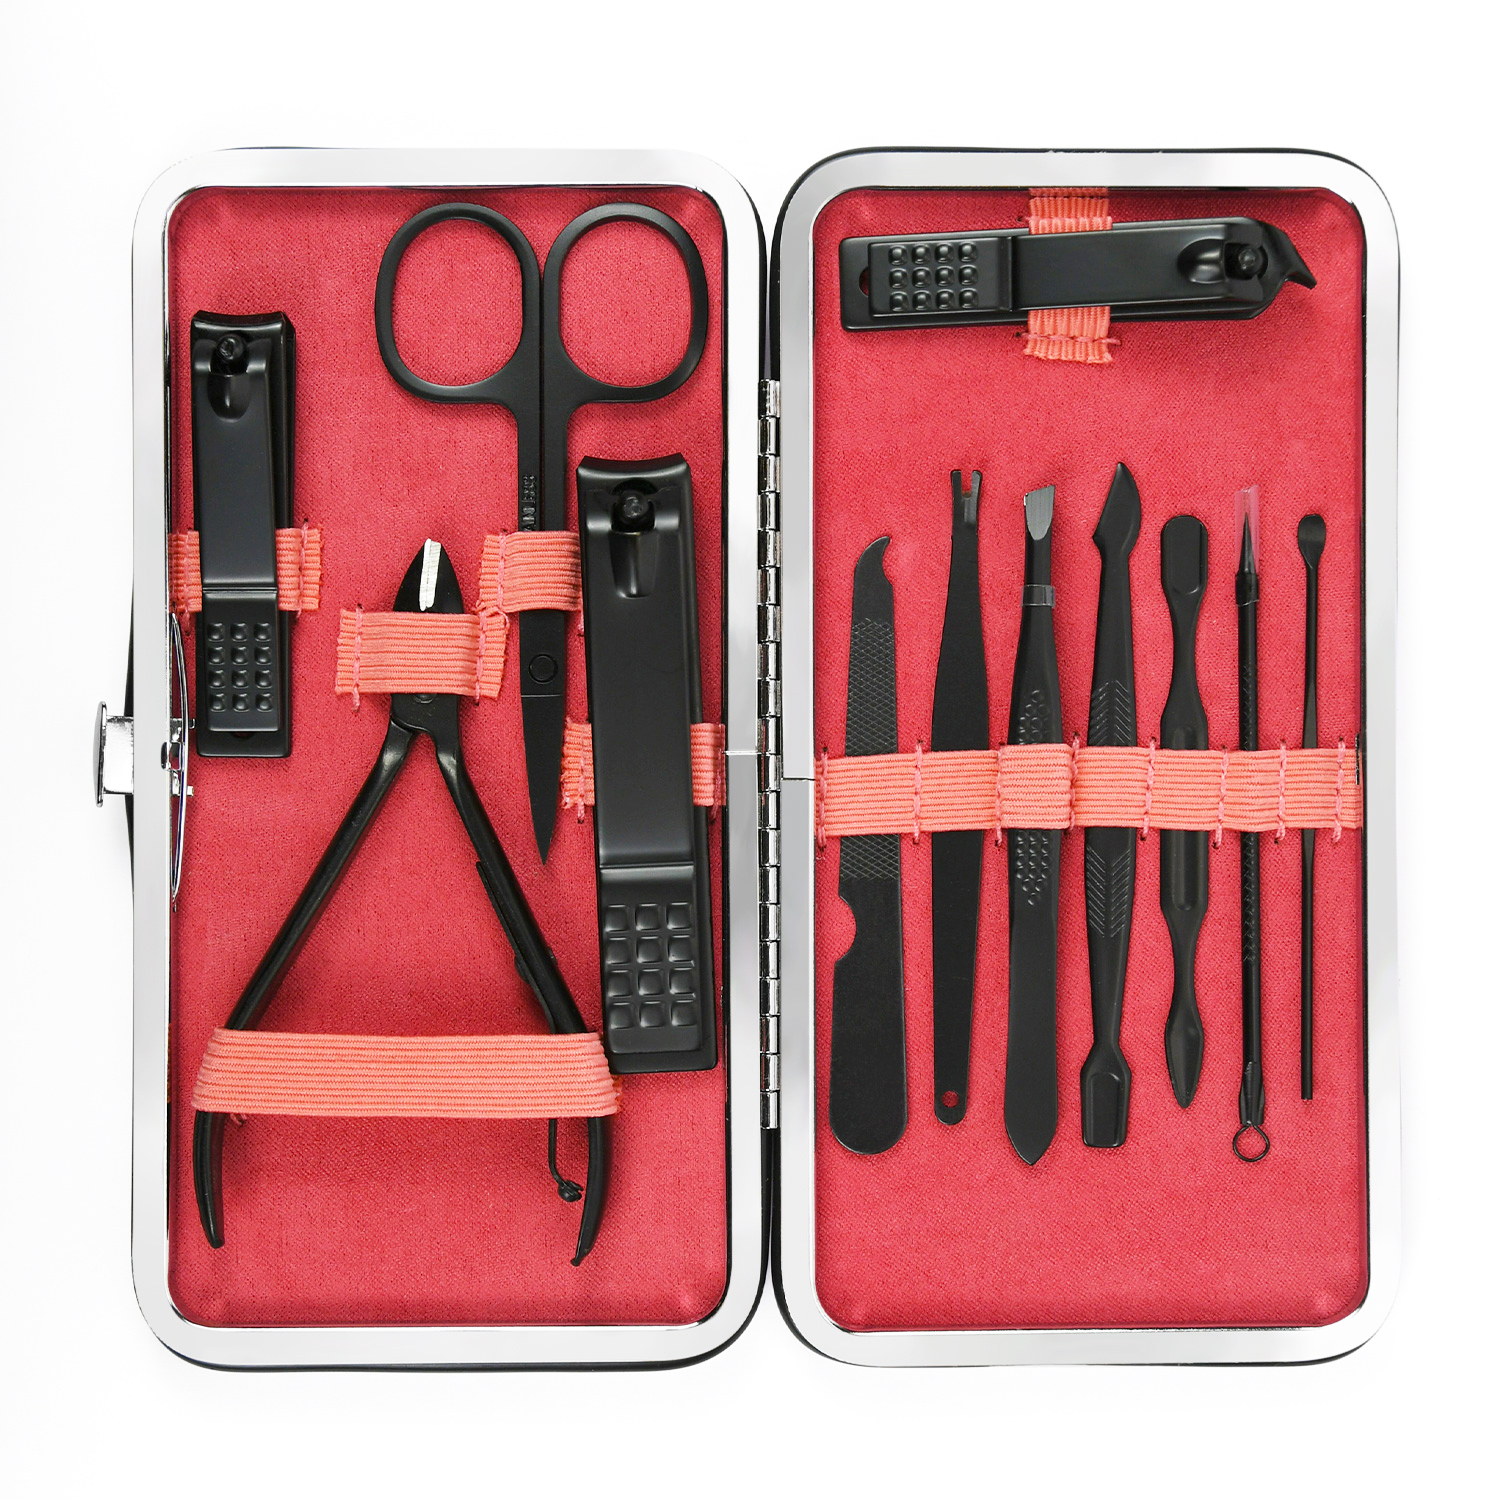 Stainless Steel Manicure Set With Box